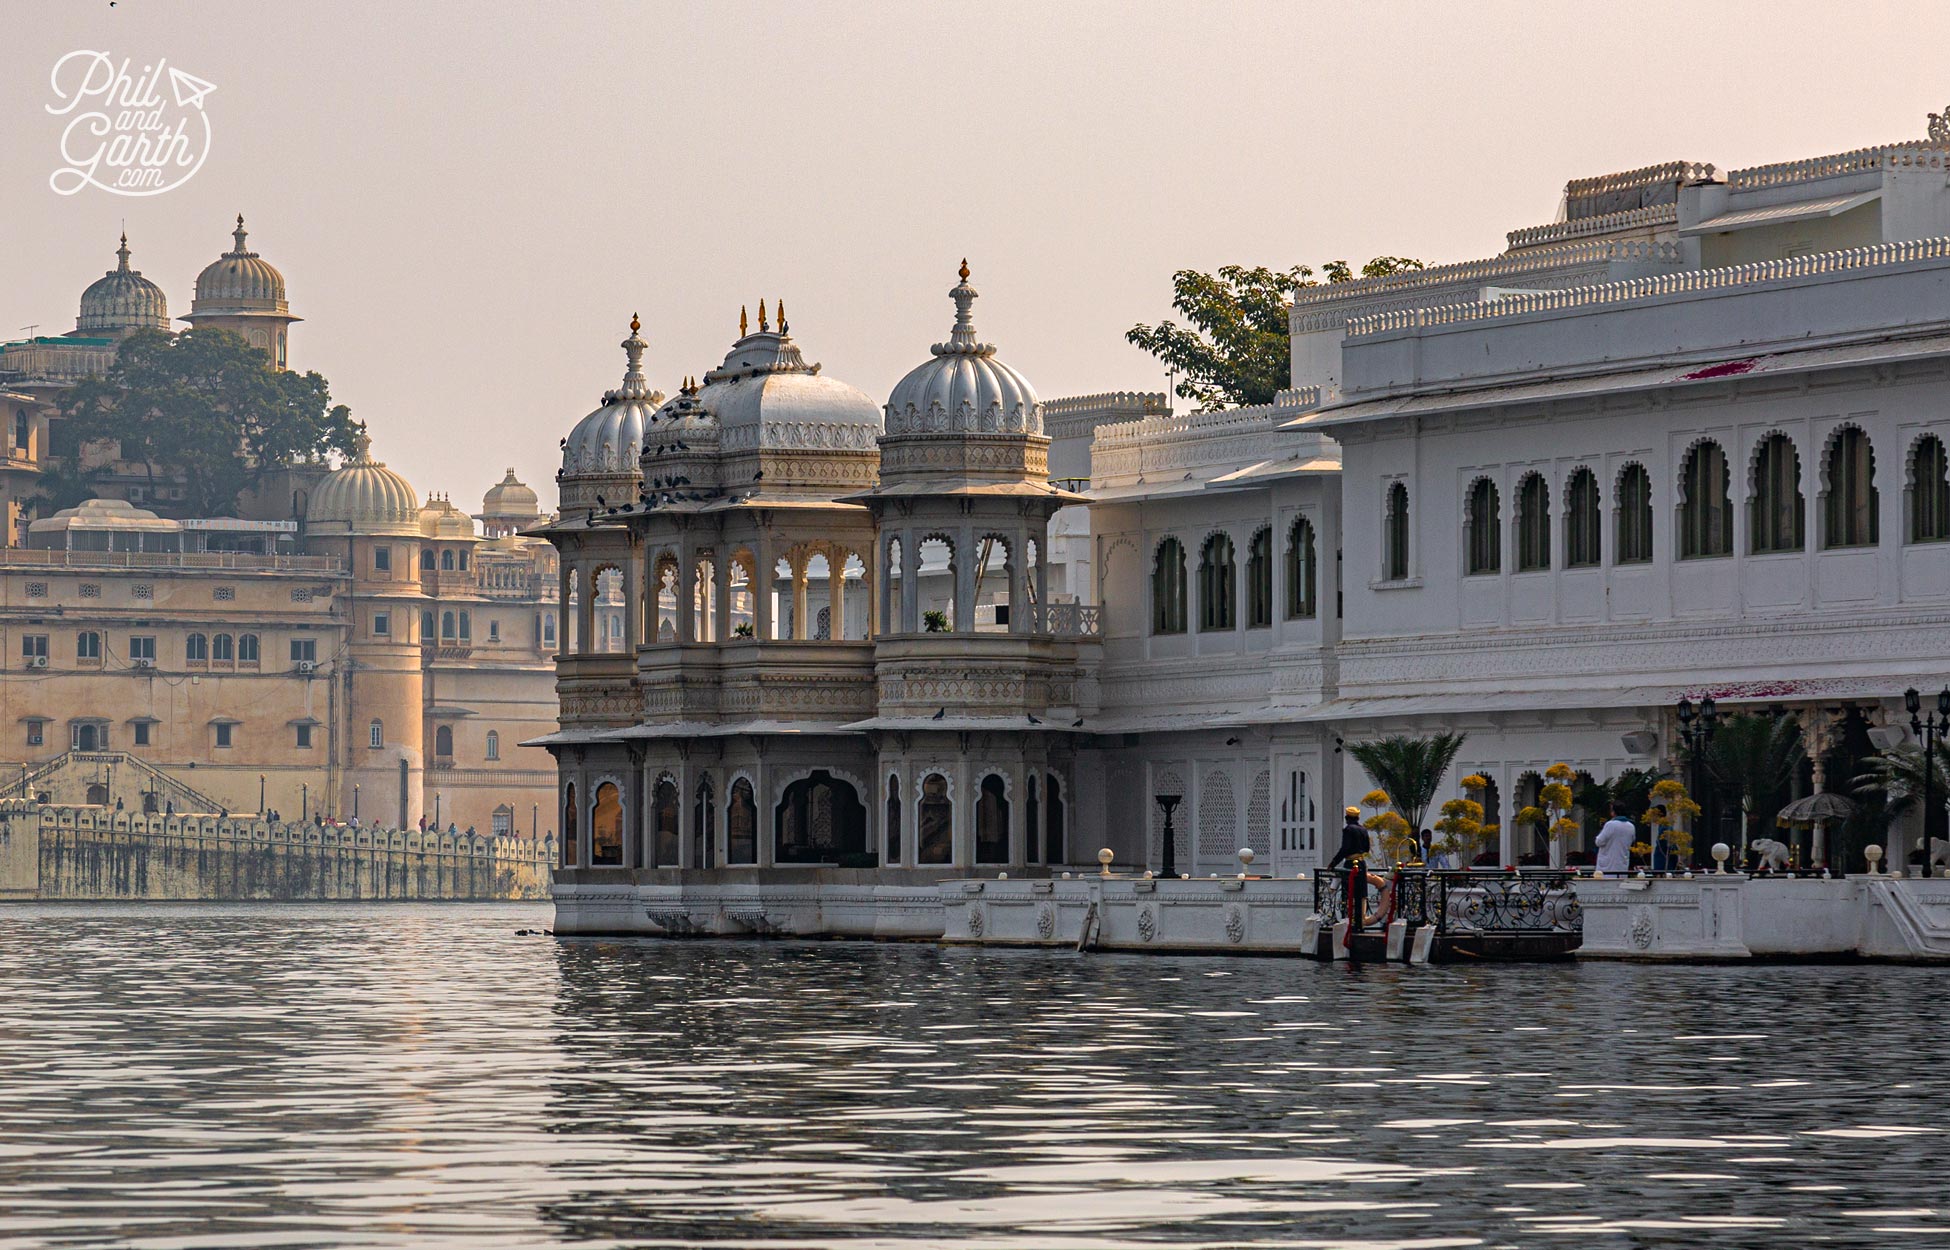 Old Palaces appear to float on the shimmering water